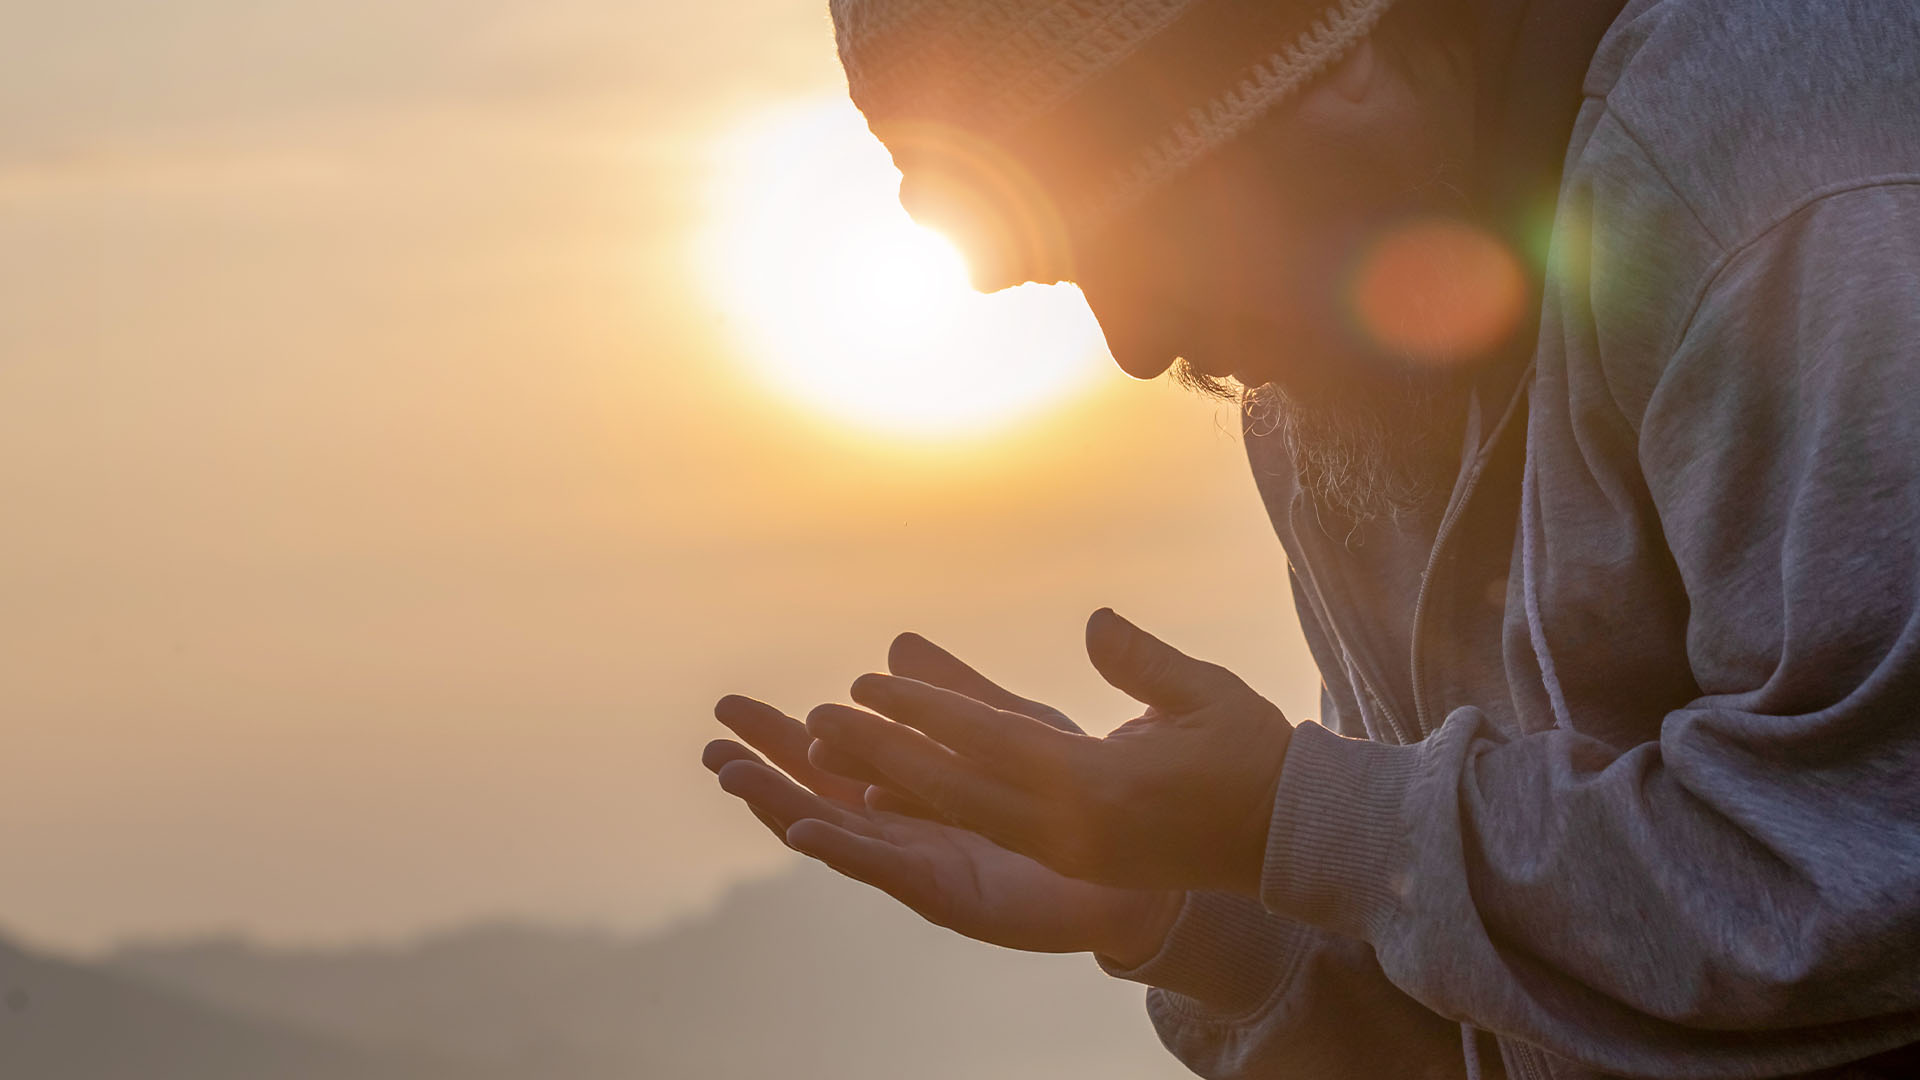 Man praying to God with sun setting in background